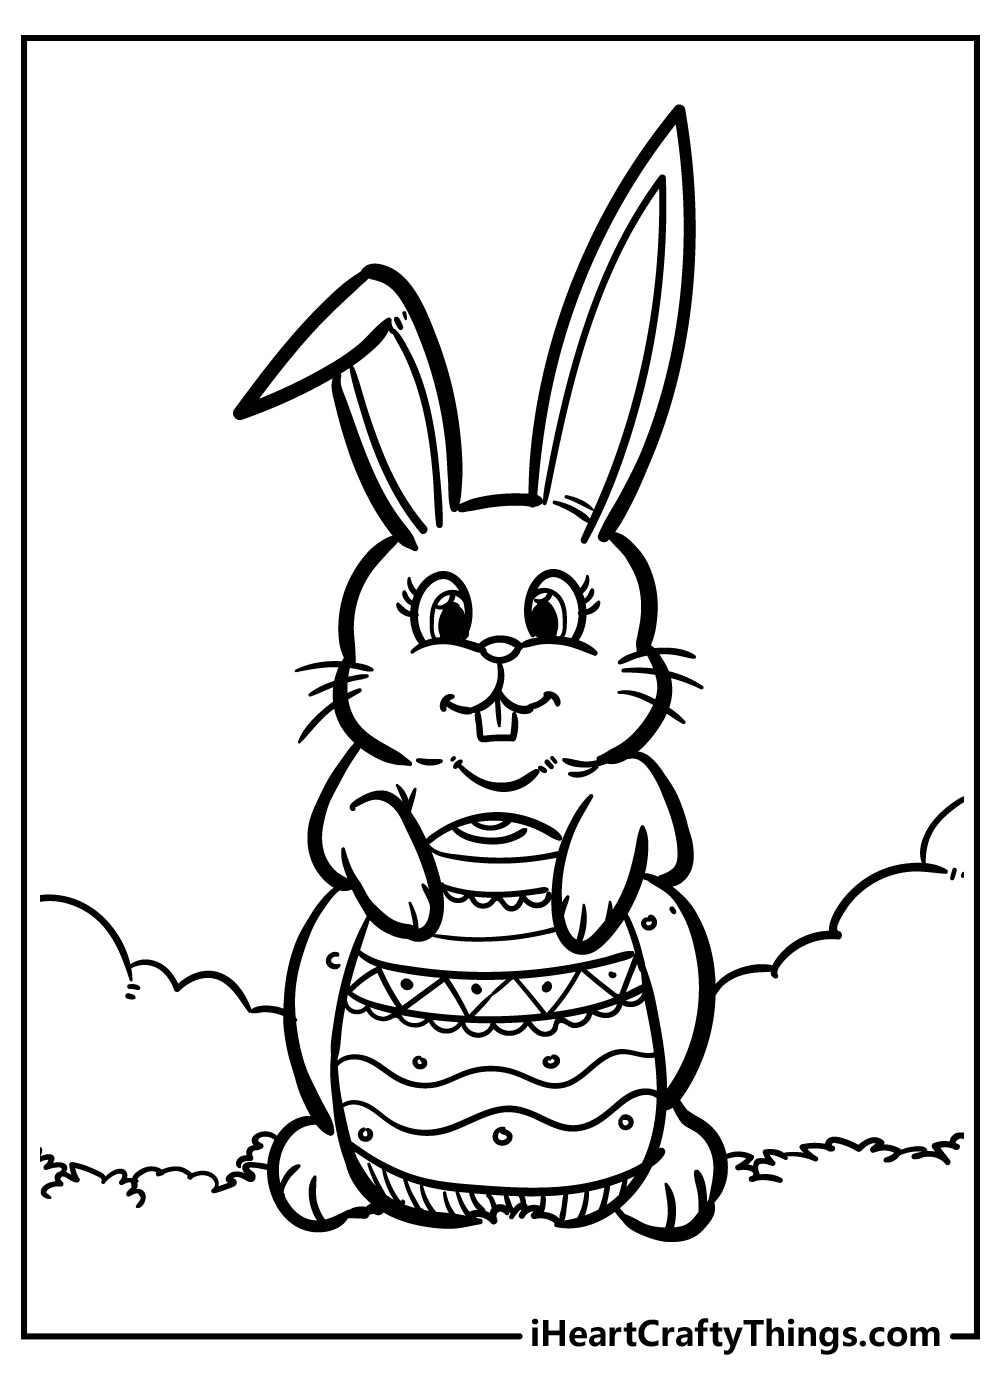 20 Festive Easter Egg Coloring Pages